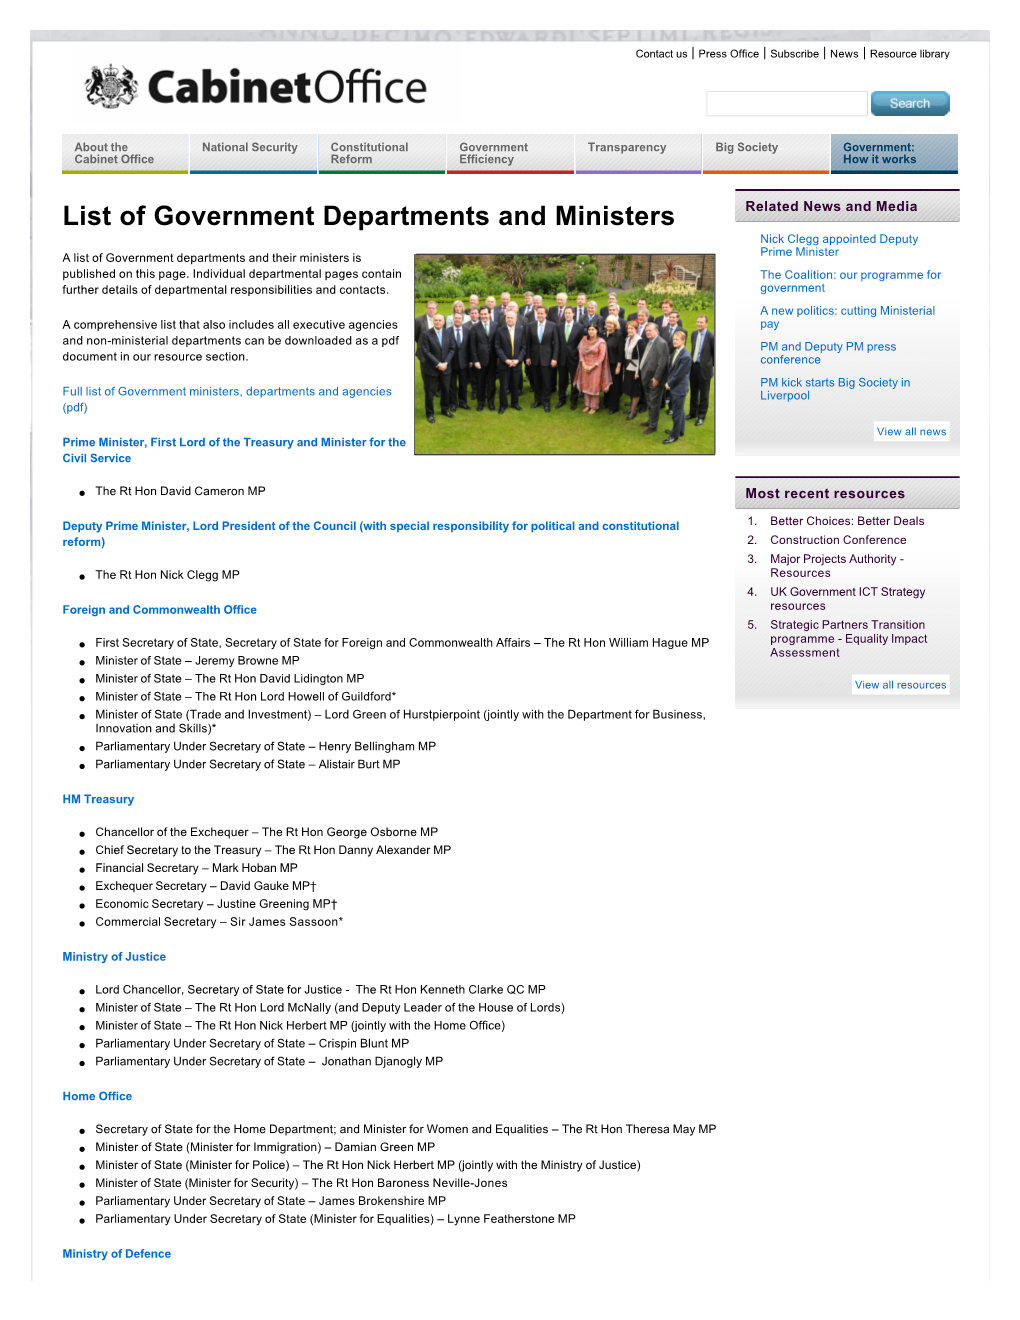 List of Government Departments and Ministers